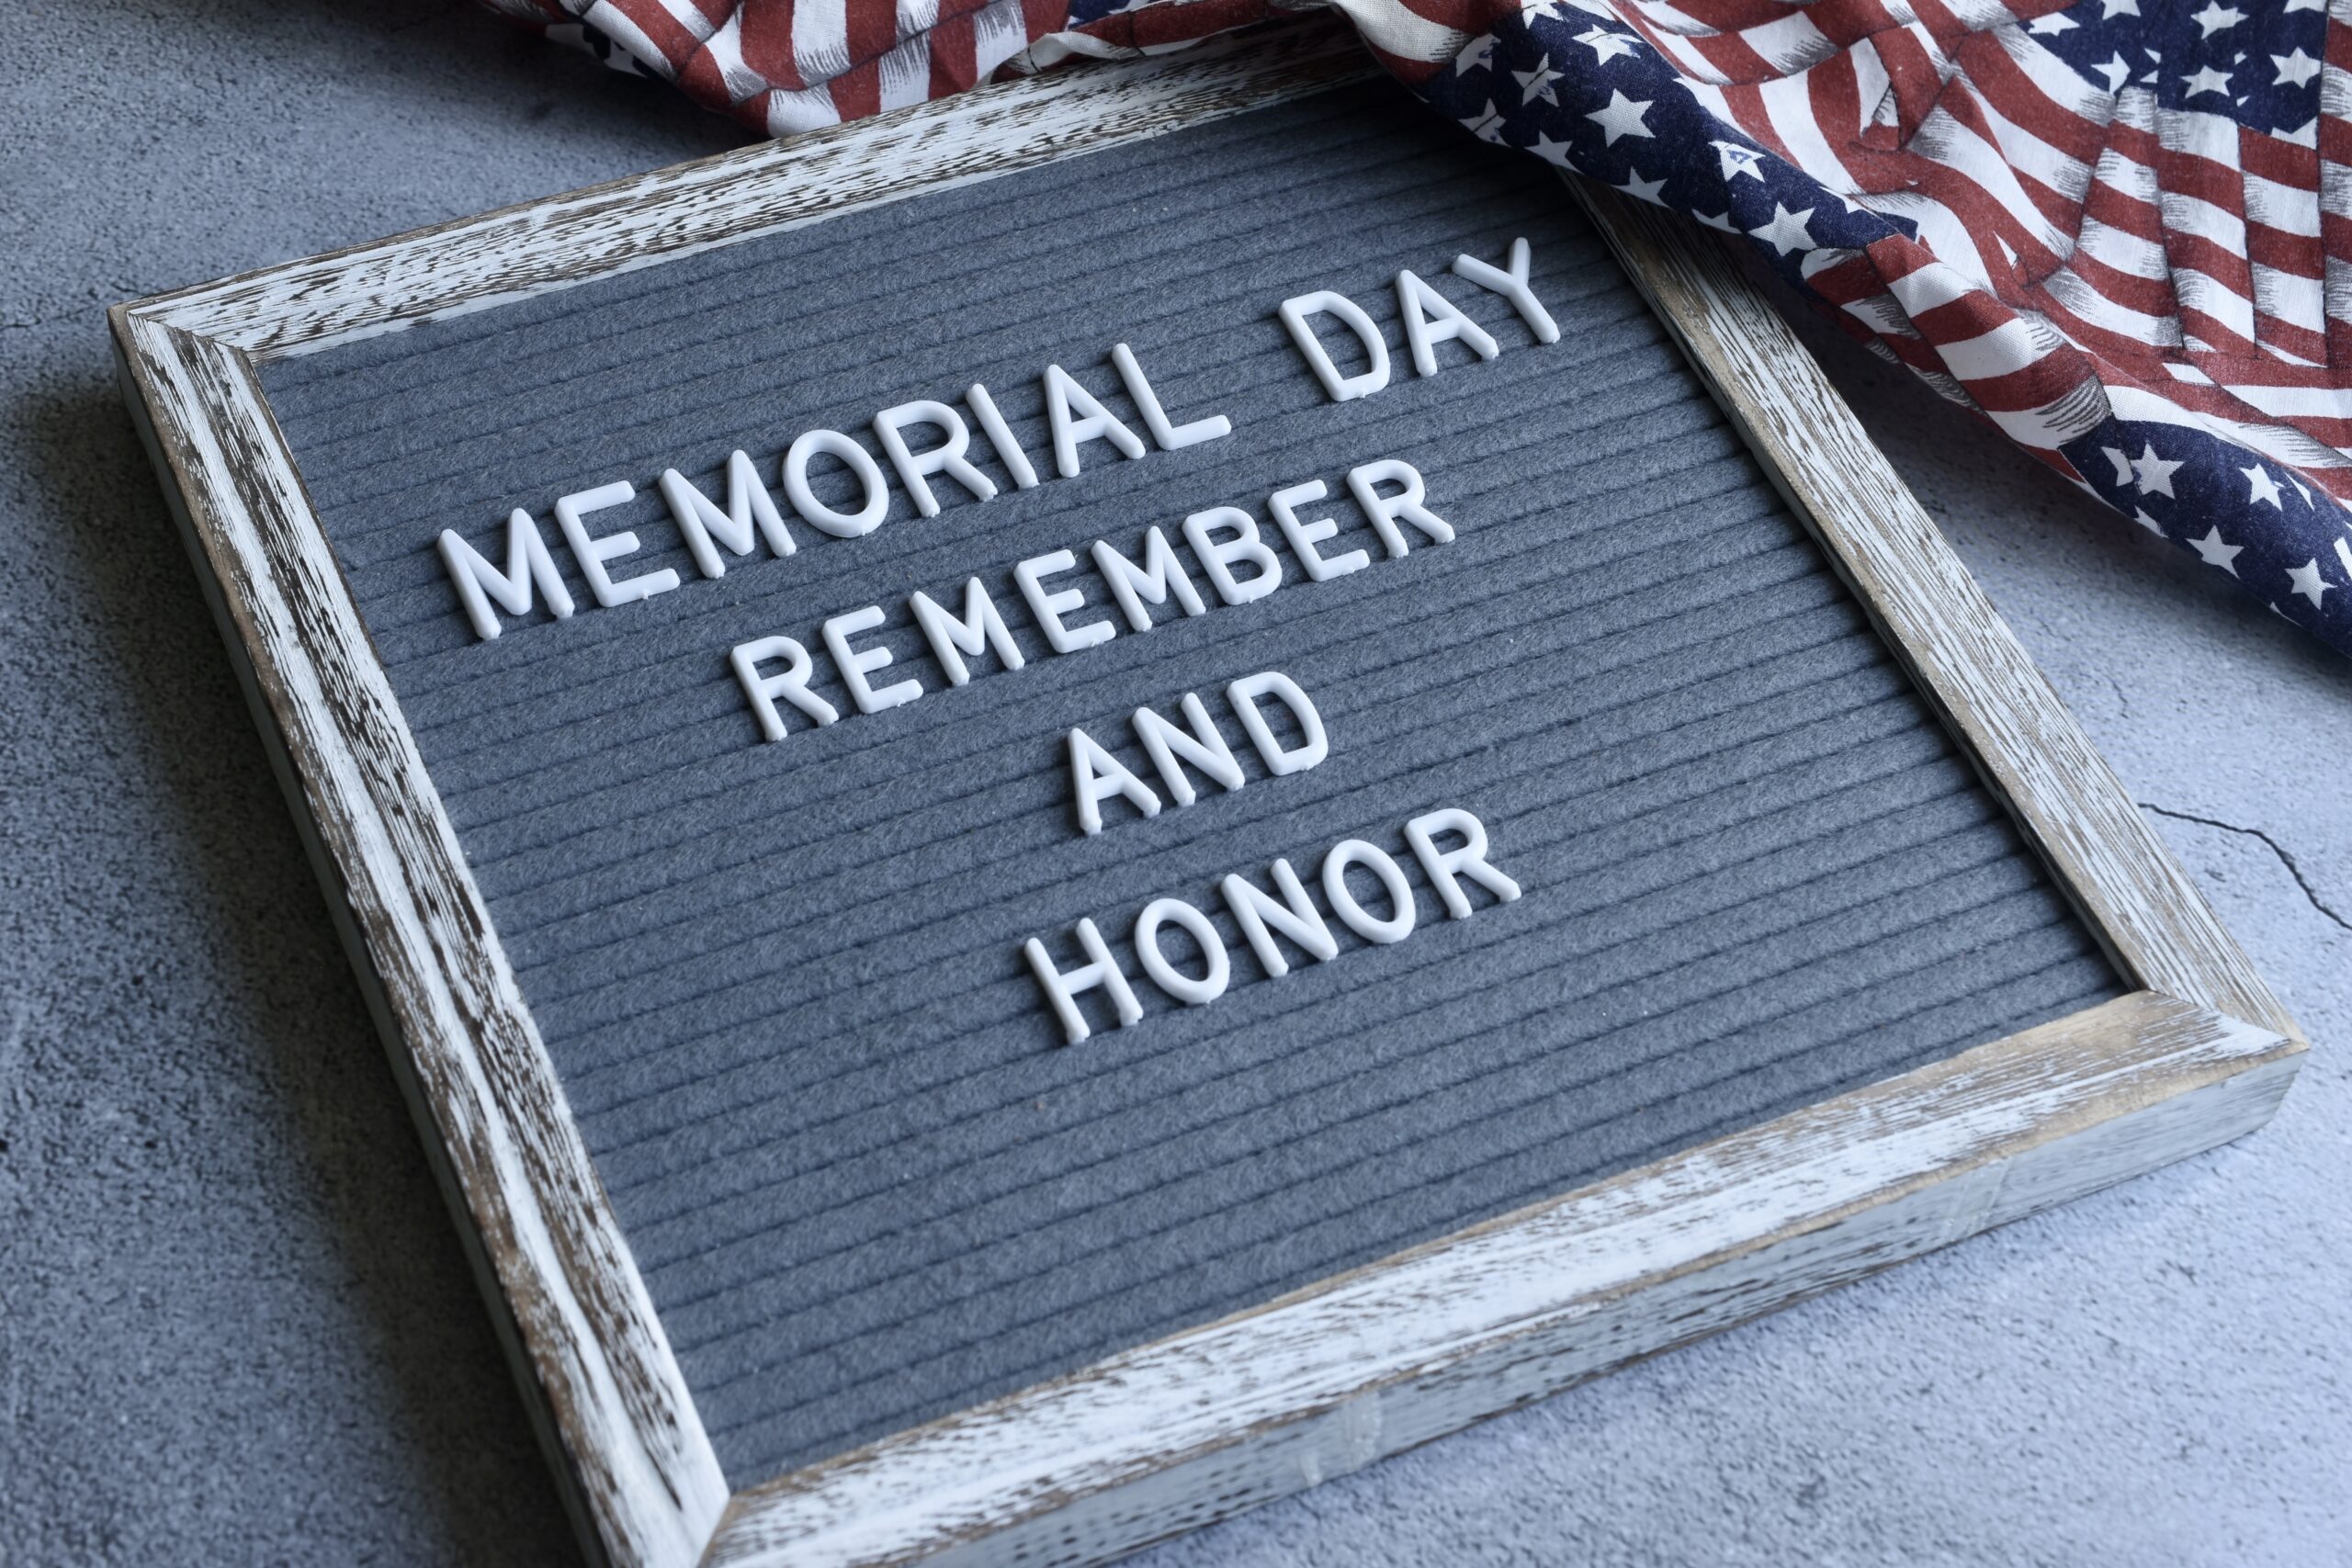 Memorial Day: remember an honor is written on a plaque beside the American flag